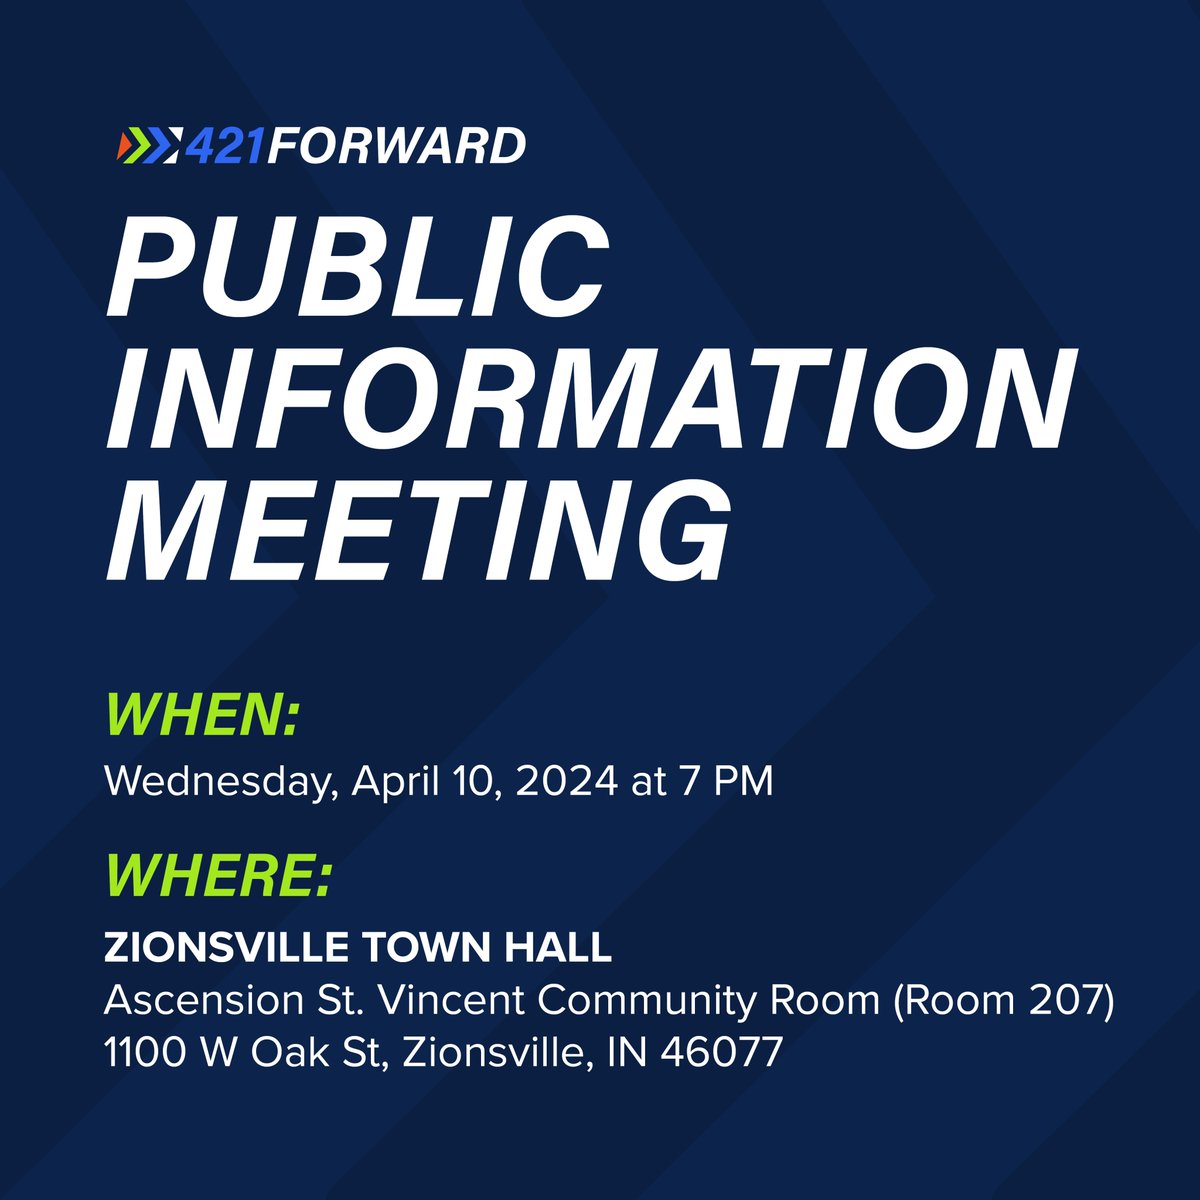 HAPPENING TONIGHT: (4/10) INDOT will be holding a public information meeting in Zionsville to gather feedback on pedestrian and mobility needs on U.S. 421 between Greenfield/Templin Road to C.R. 300 S in Zionsville. For more, click the link below. ⬇ lnks.gd/2/2v5L-z-